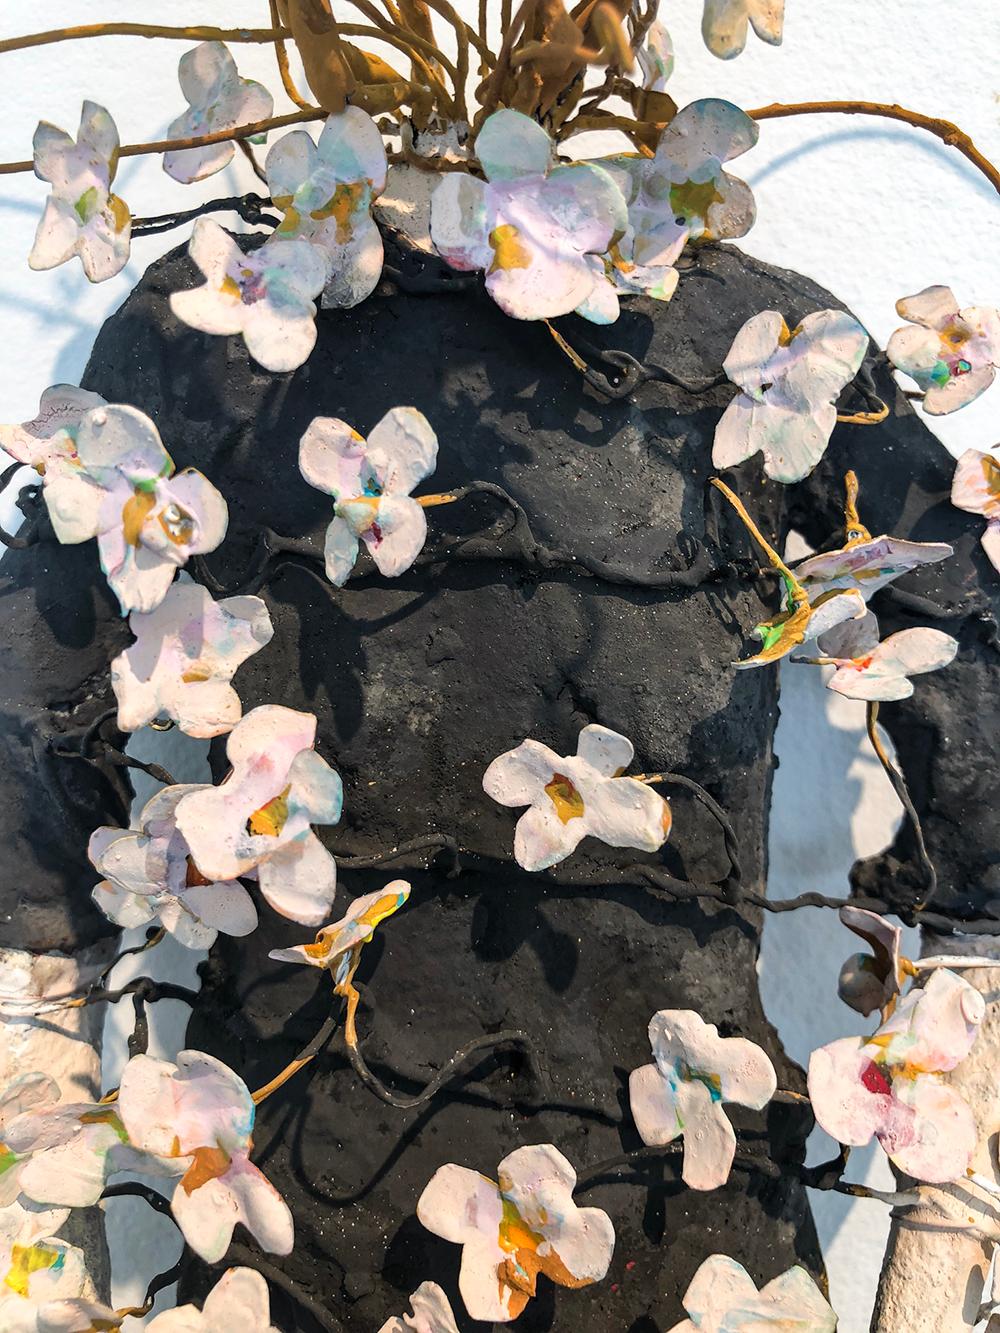 Dressed in Wildflowers and Furrow Weeds, 2018  concrete, copper and milk paint   23 x 4 x 7 inches            

JOHAN HAGAMAN  ARTIST STATEMENT

It has been said that the act of observation is linked to the “reality” observed—that we can create our